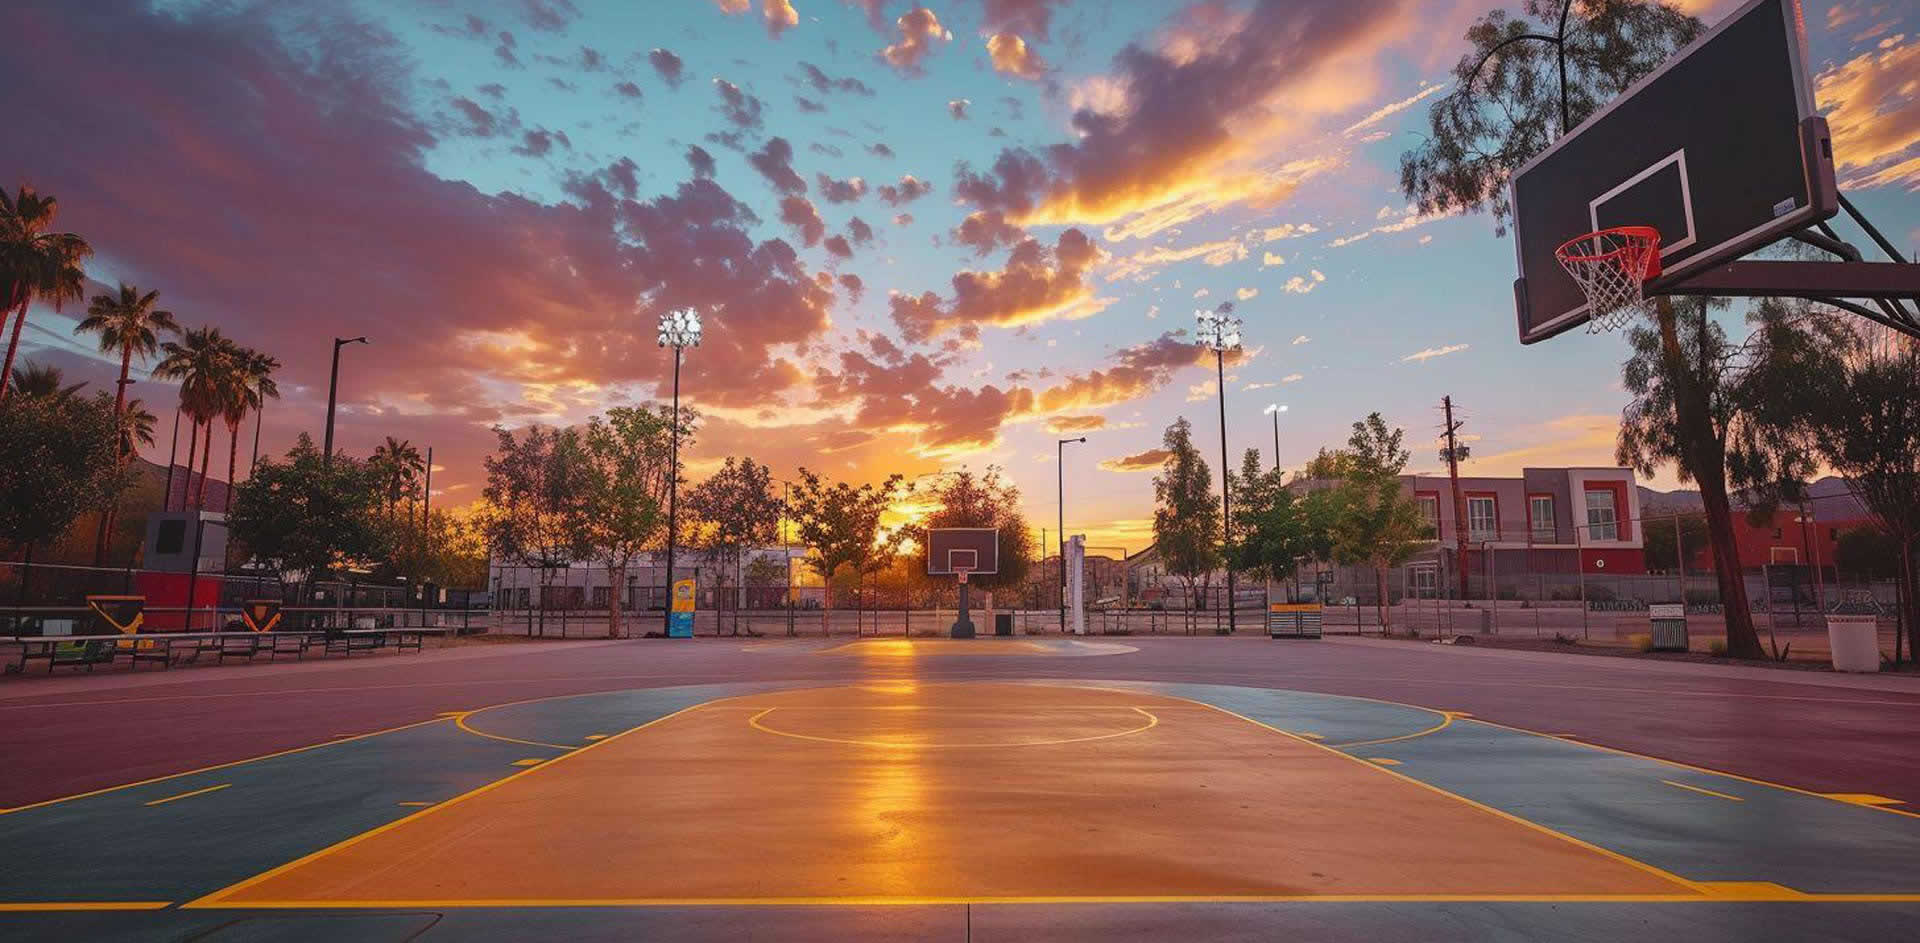 A basketball court with trees and a sunset